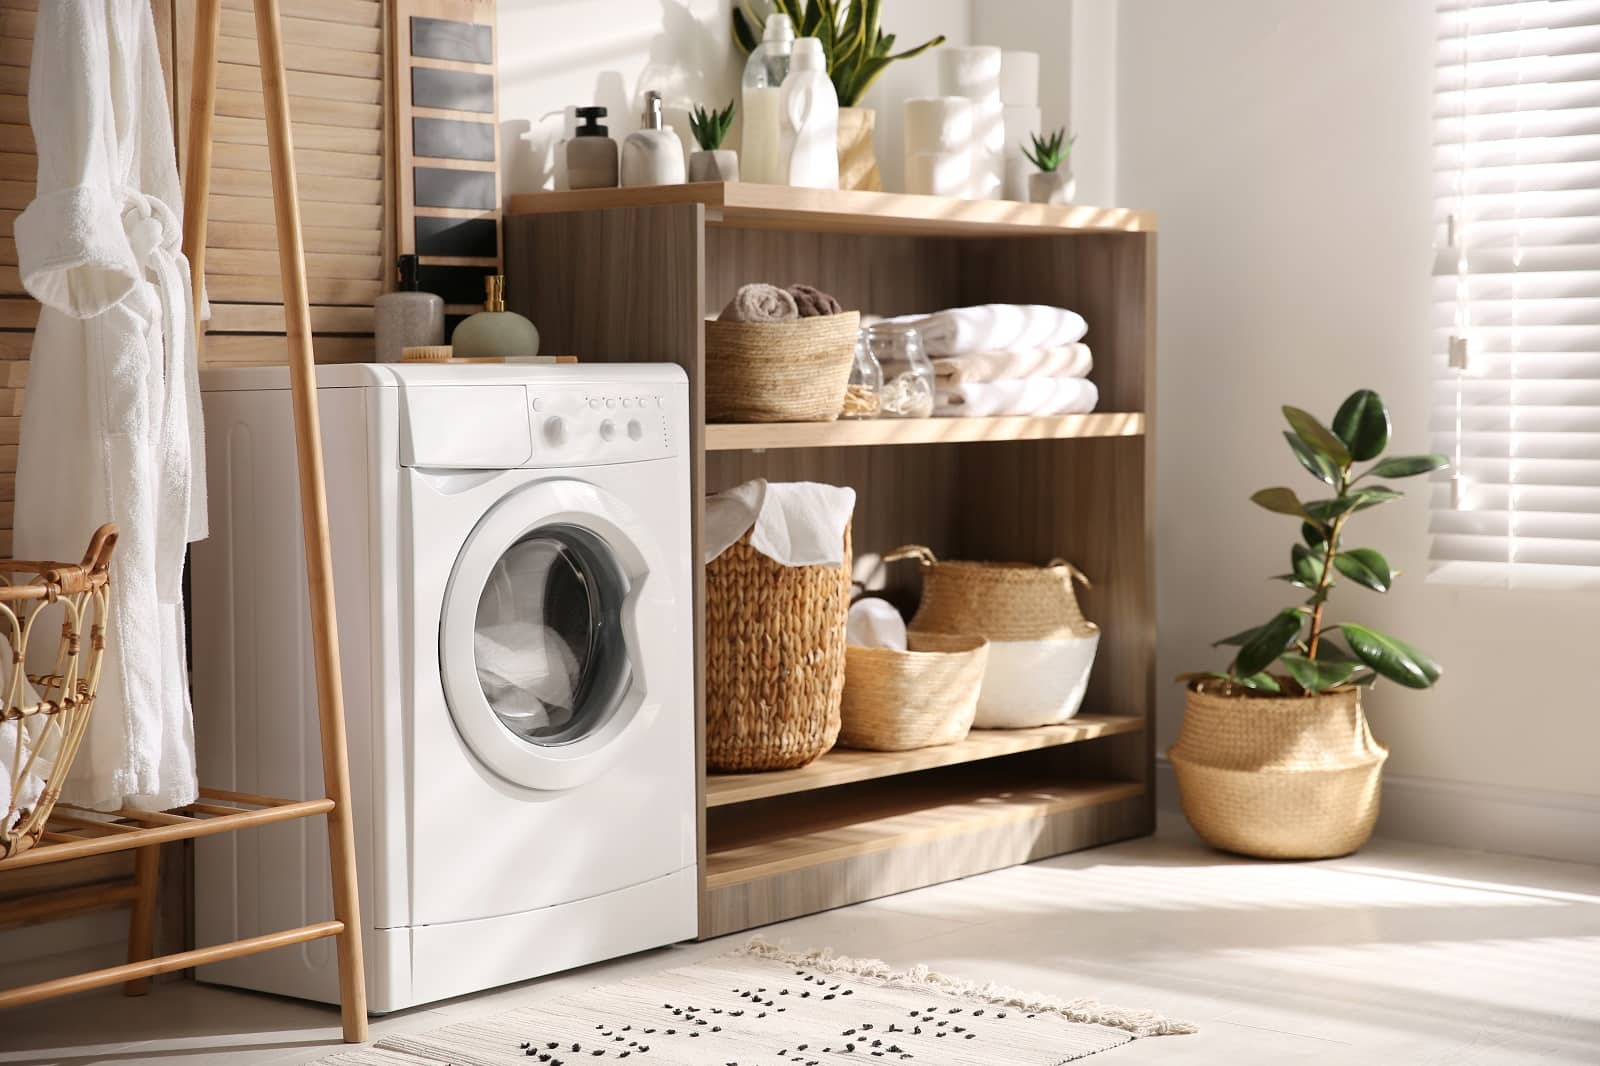 6 Laundry Room Design Ideas And Tips. Casual interior with storage and small washing machine and plant making living atmosphere